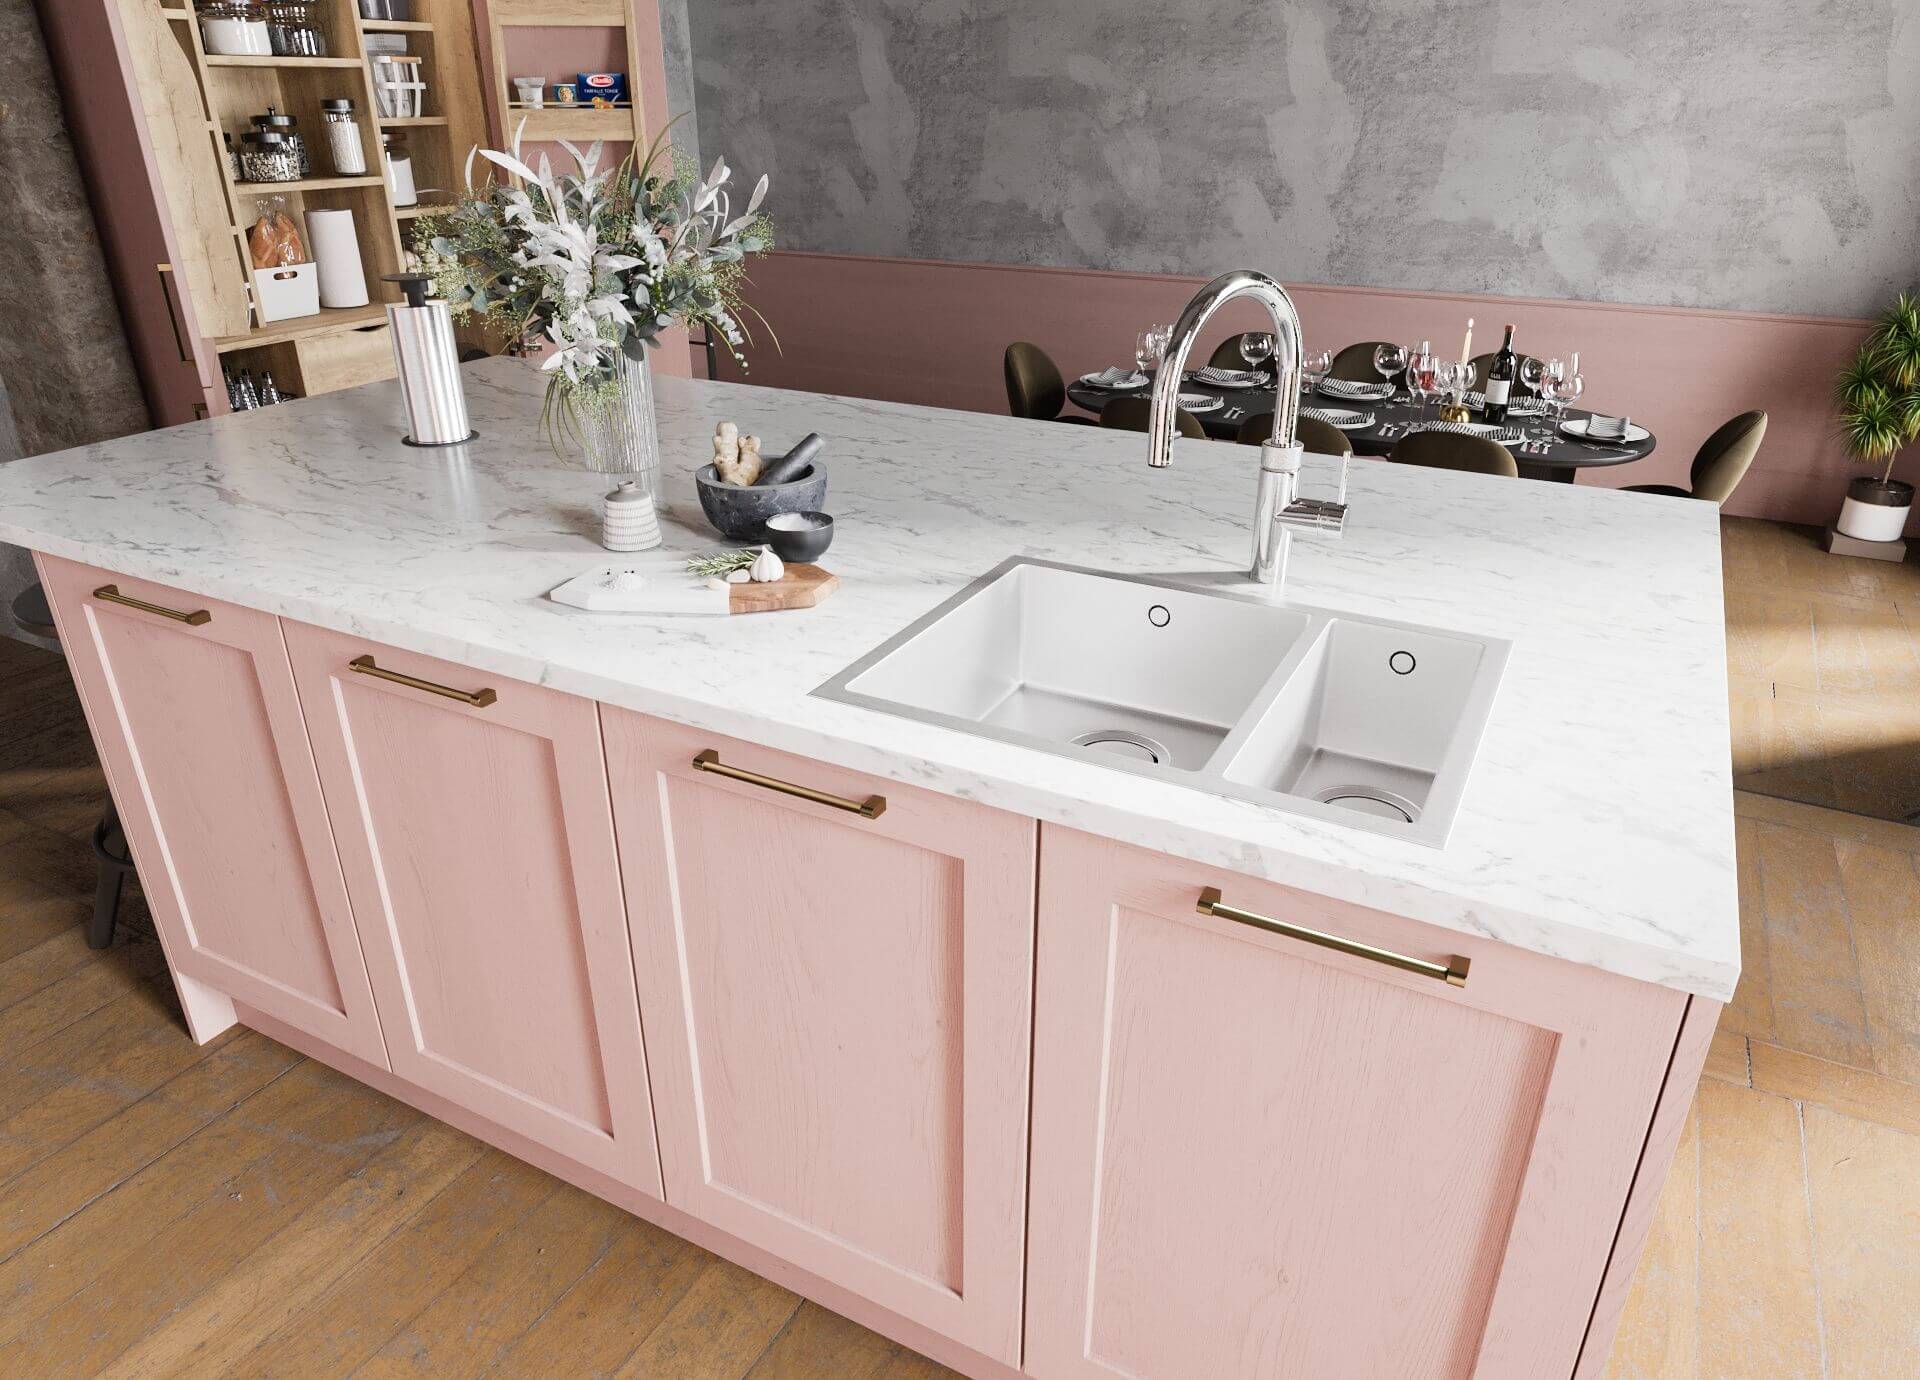 Should You Have a Sink or Hob On Your Kitchen Island? — Herringbone